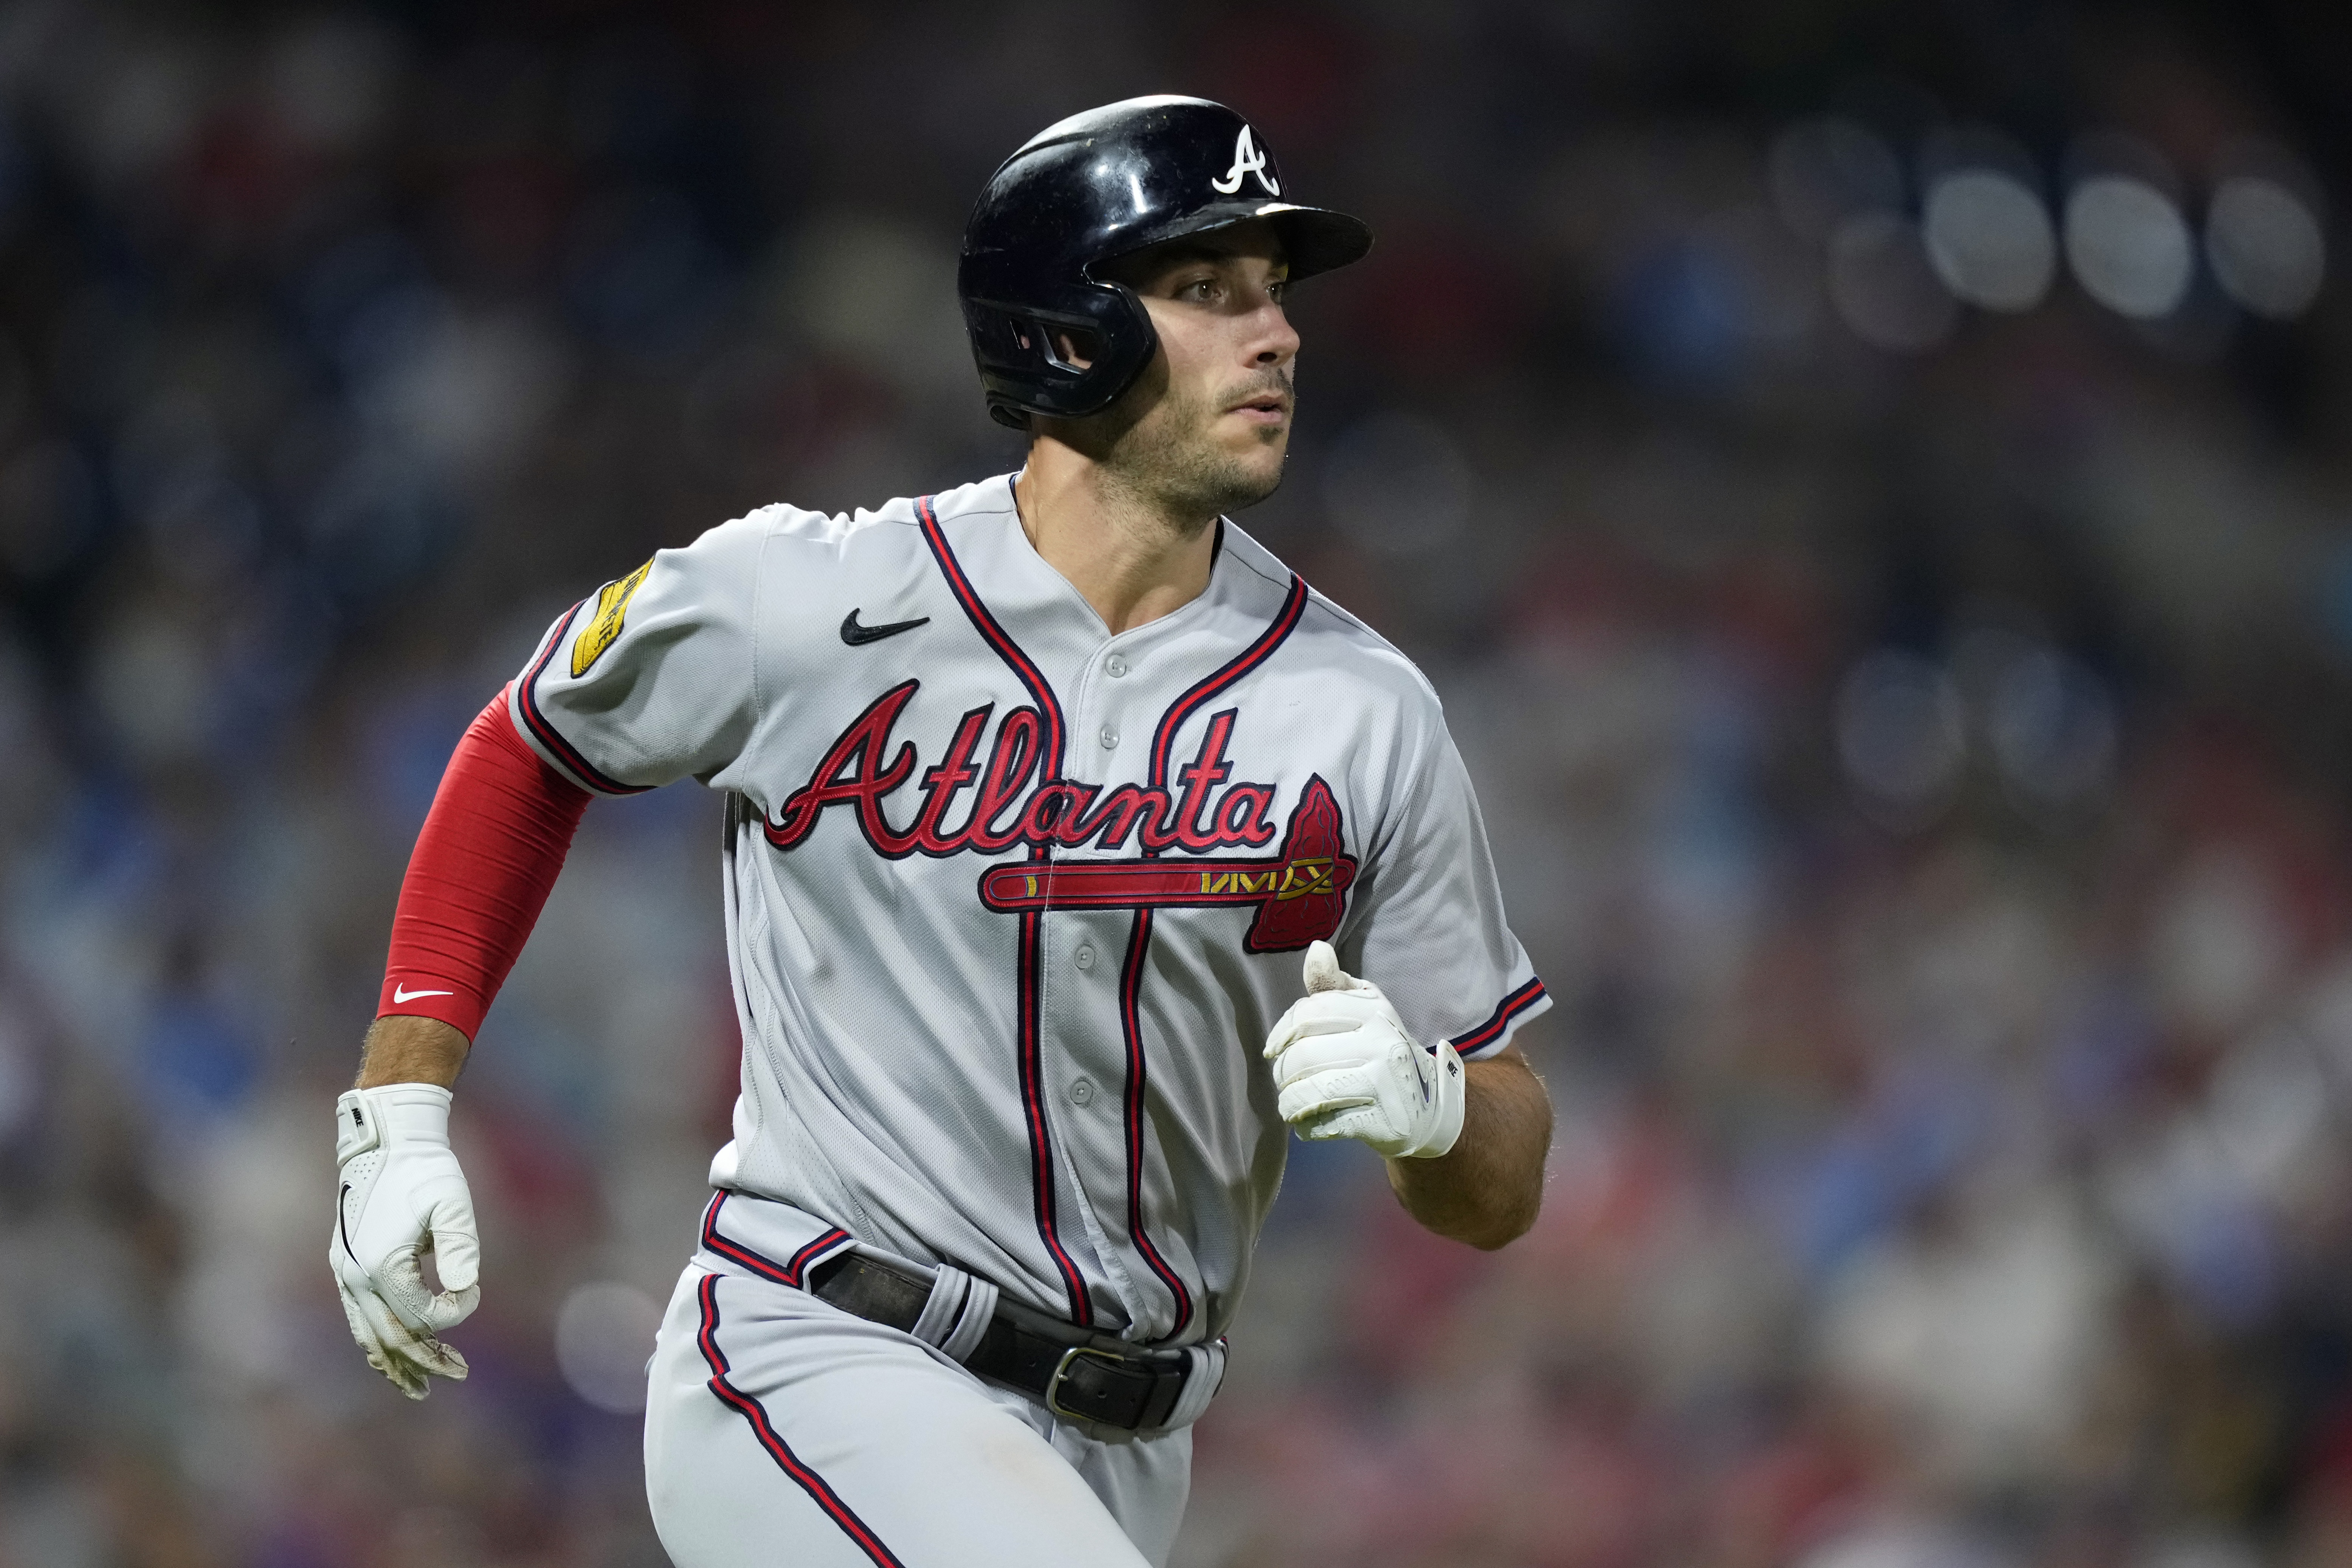 Cardinals-Braves rained out, day-night doubleheader today